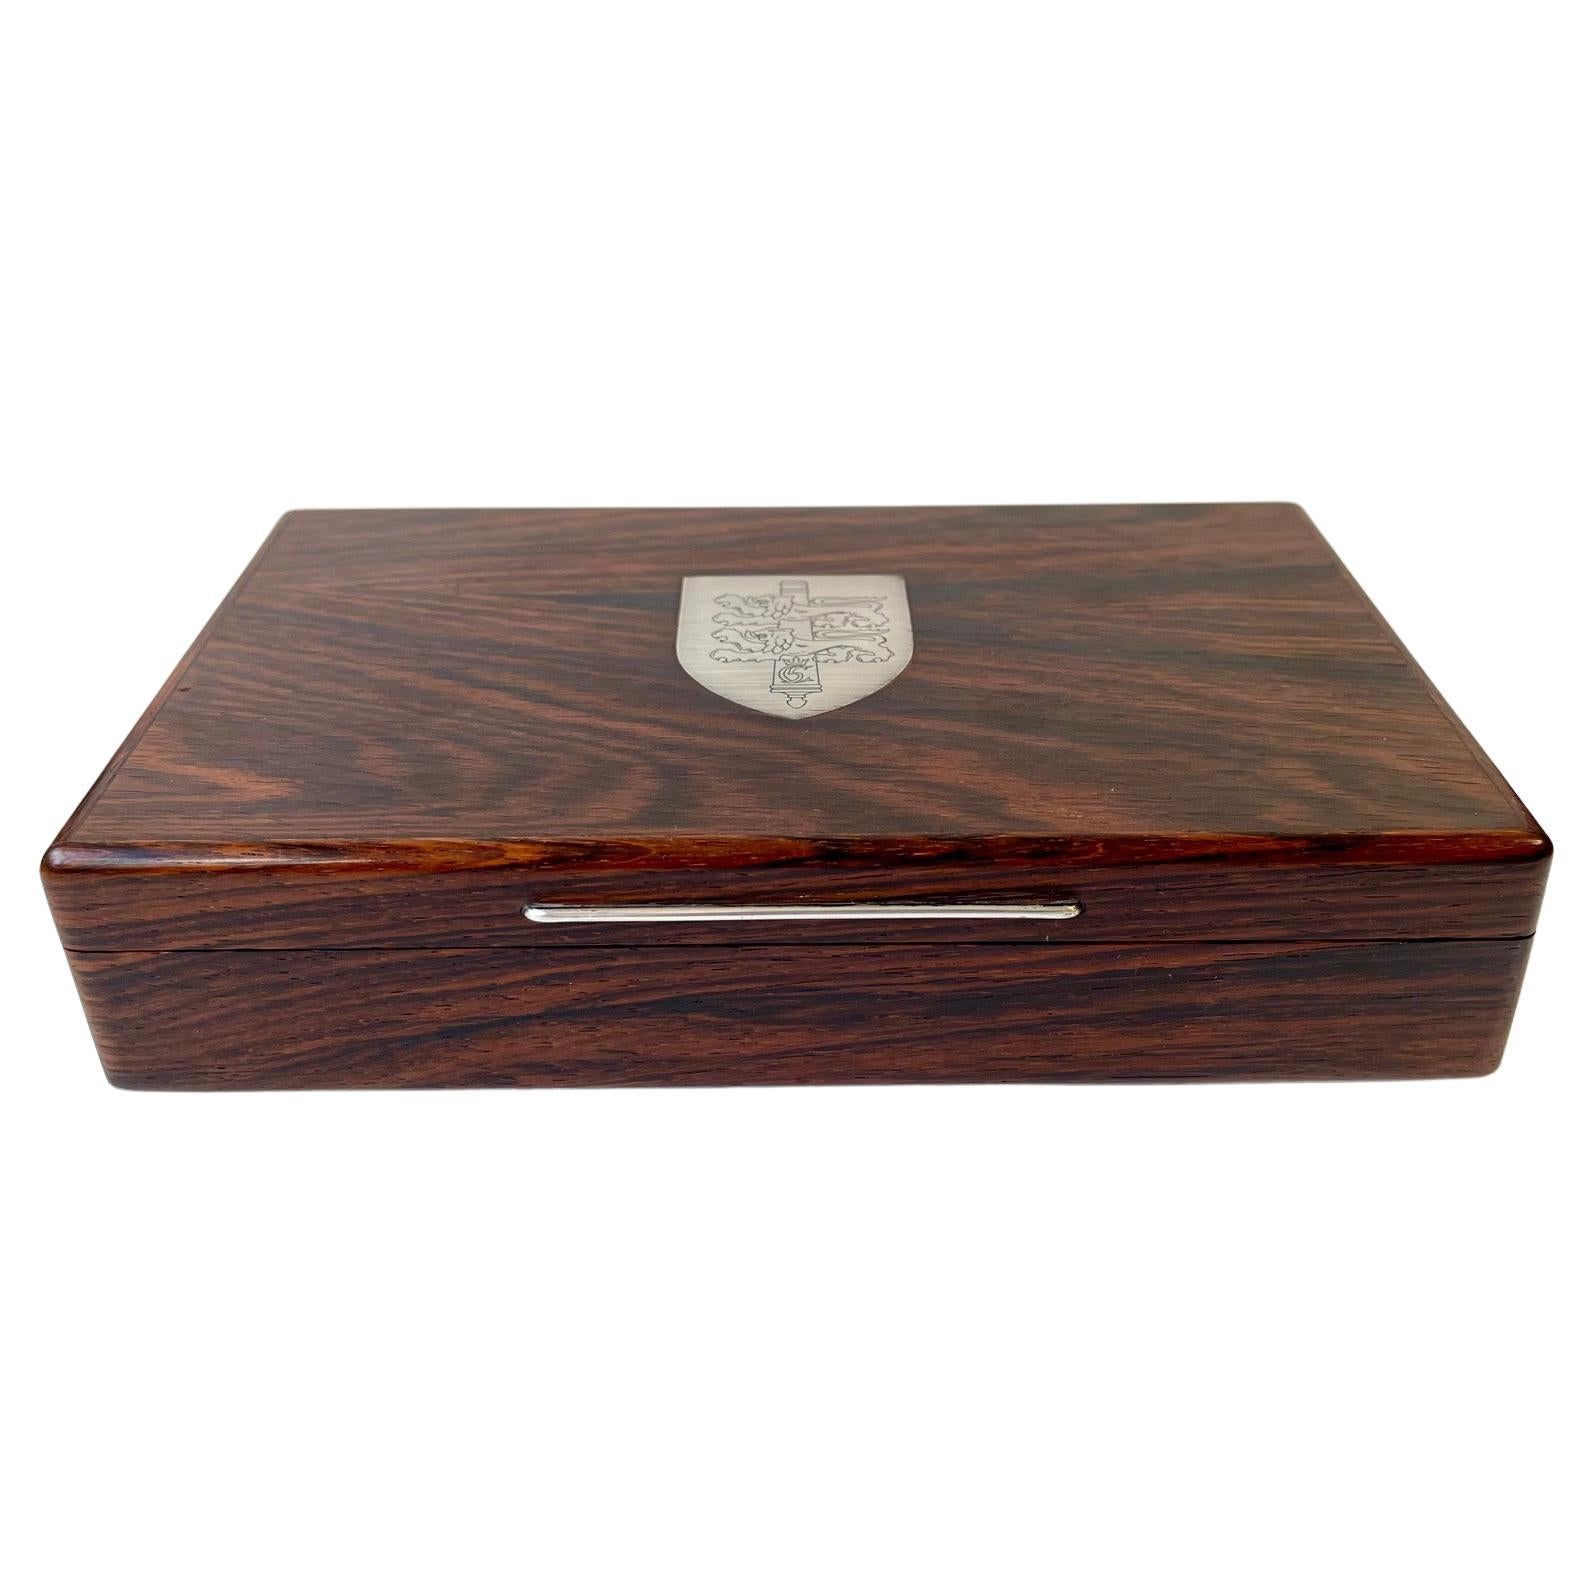 Cigar Box in Rosewood and Silver with Royal Danish coat of Arms, 1970s